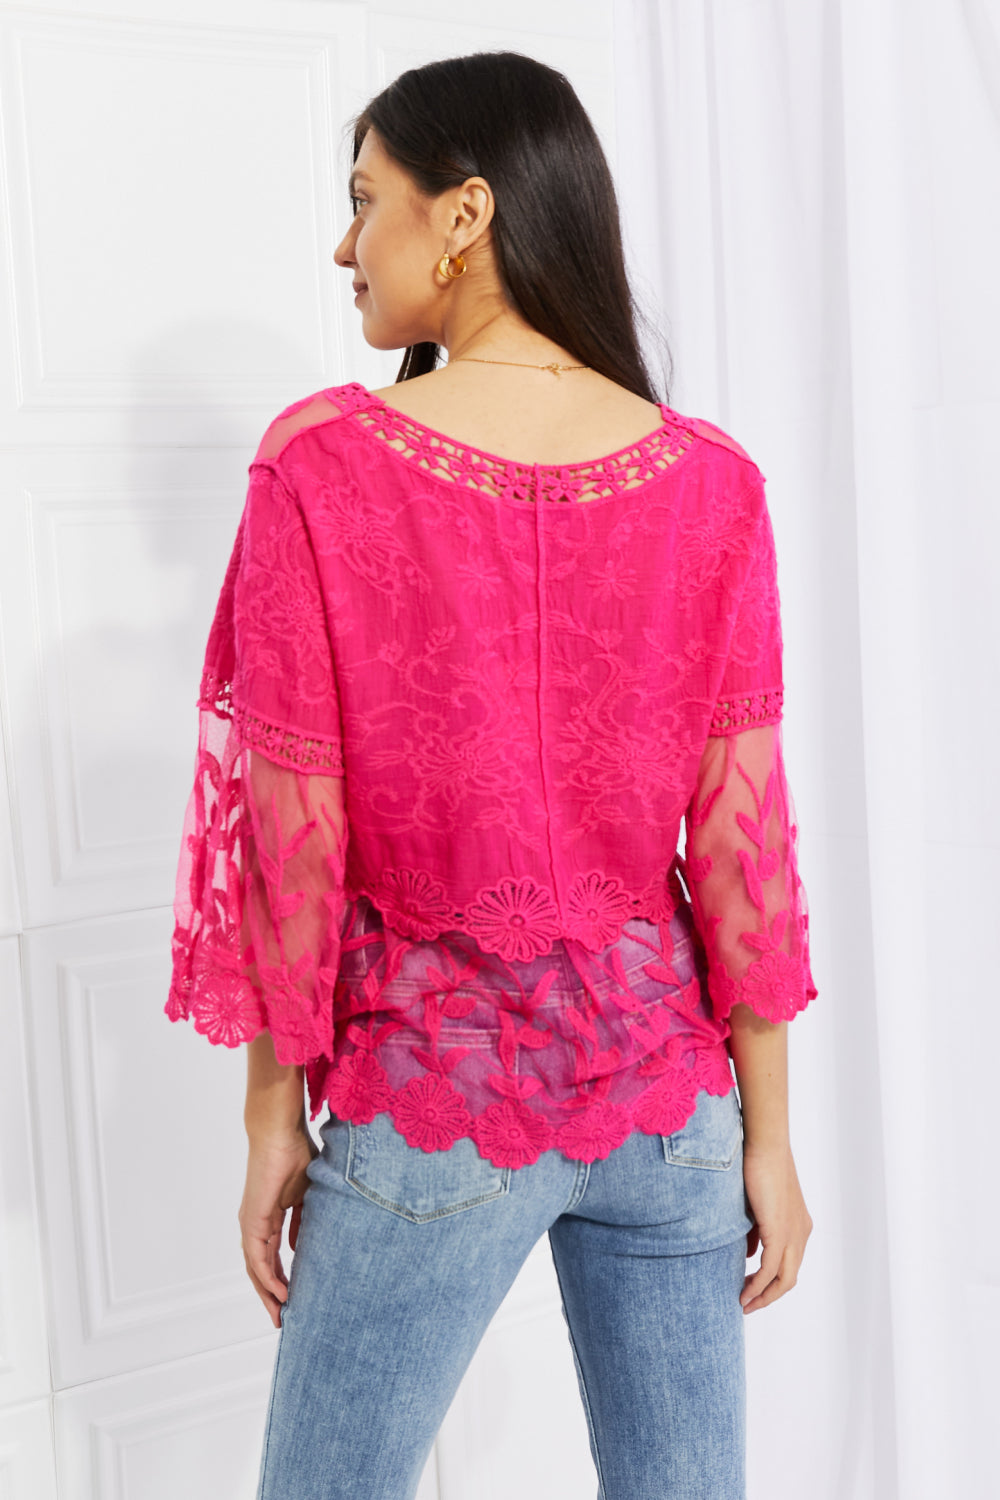 Lace Oasis Top in Hot Pink  Southern Soul Collectives 